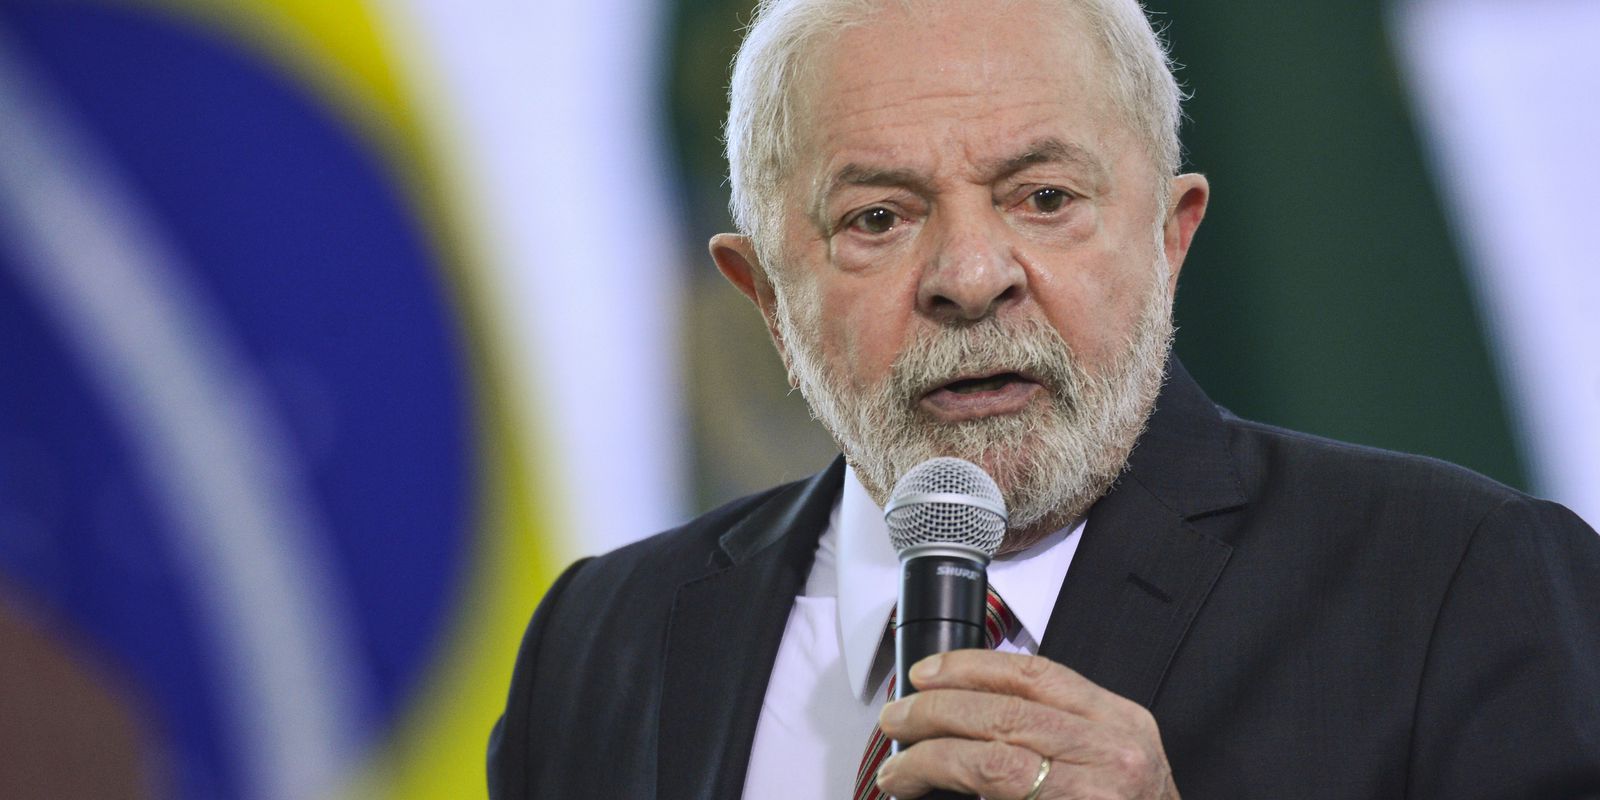 Military intelligence did not warn of coup attempt, says Lula